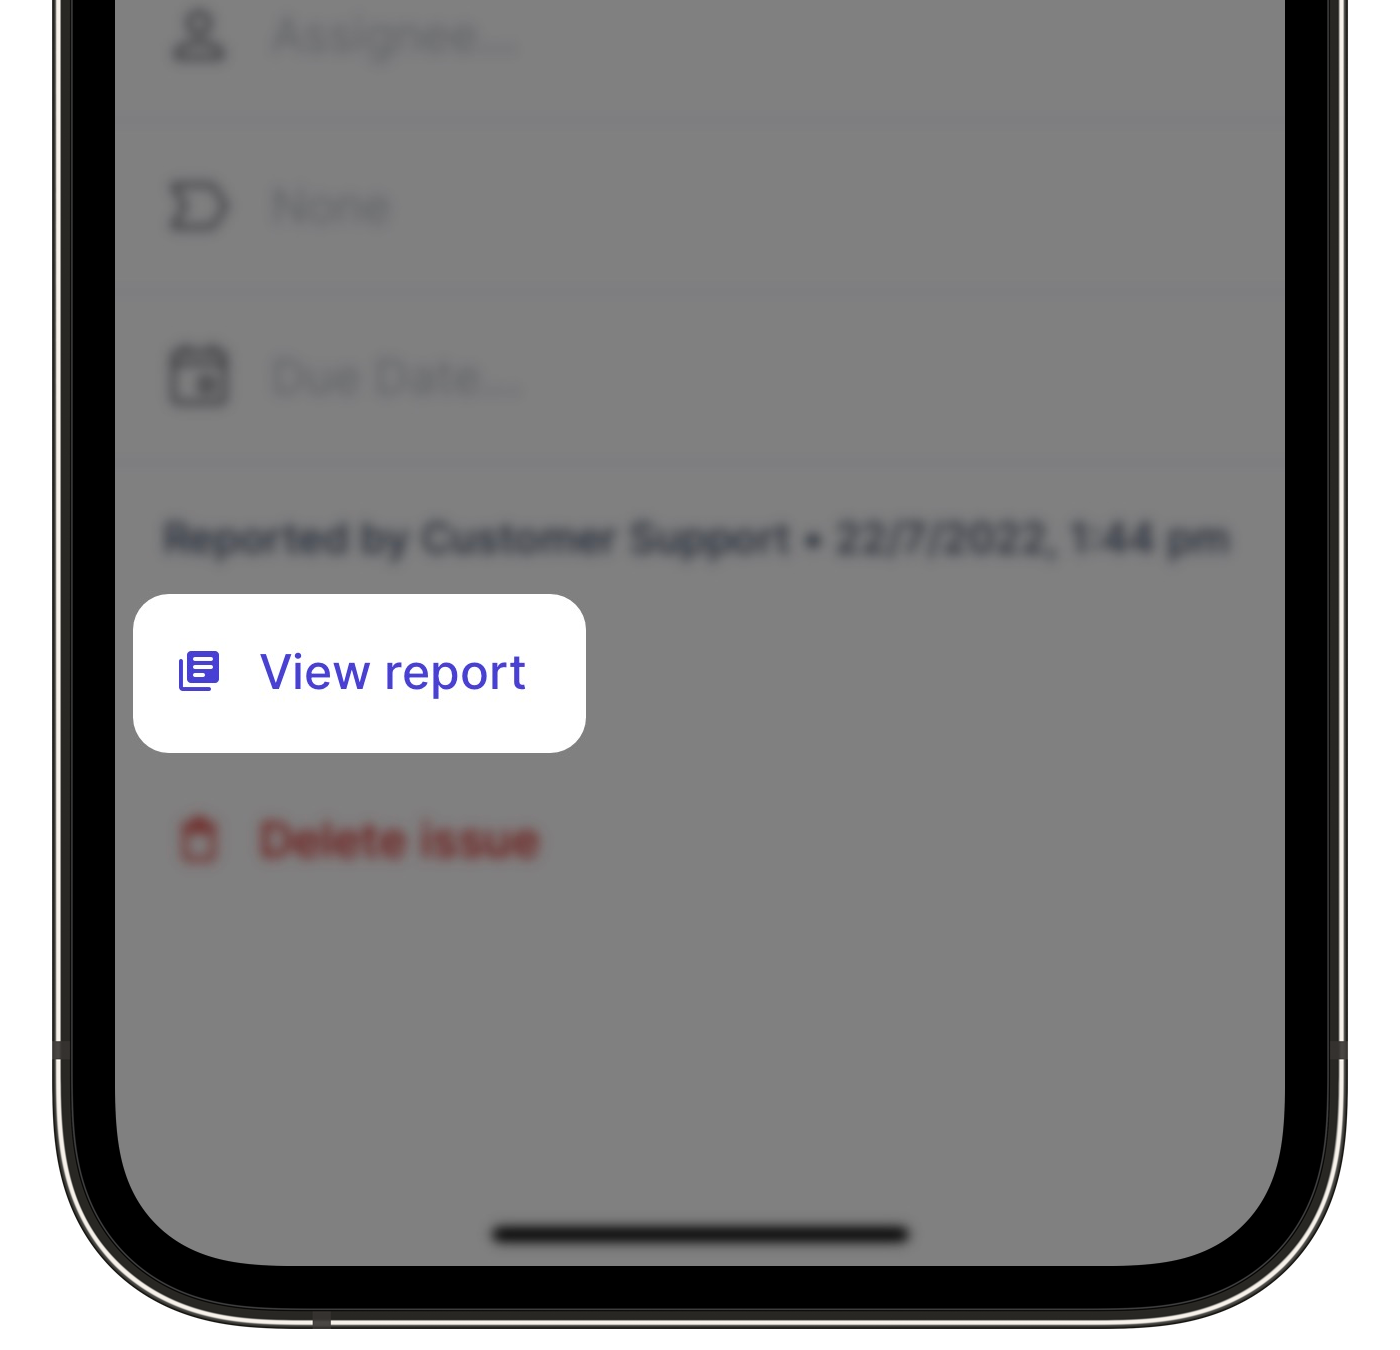 Export an issue report as PDF via the mobile app.